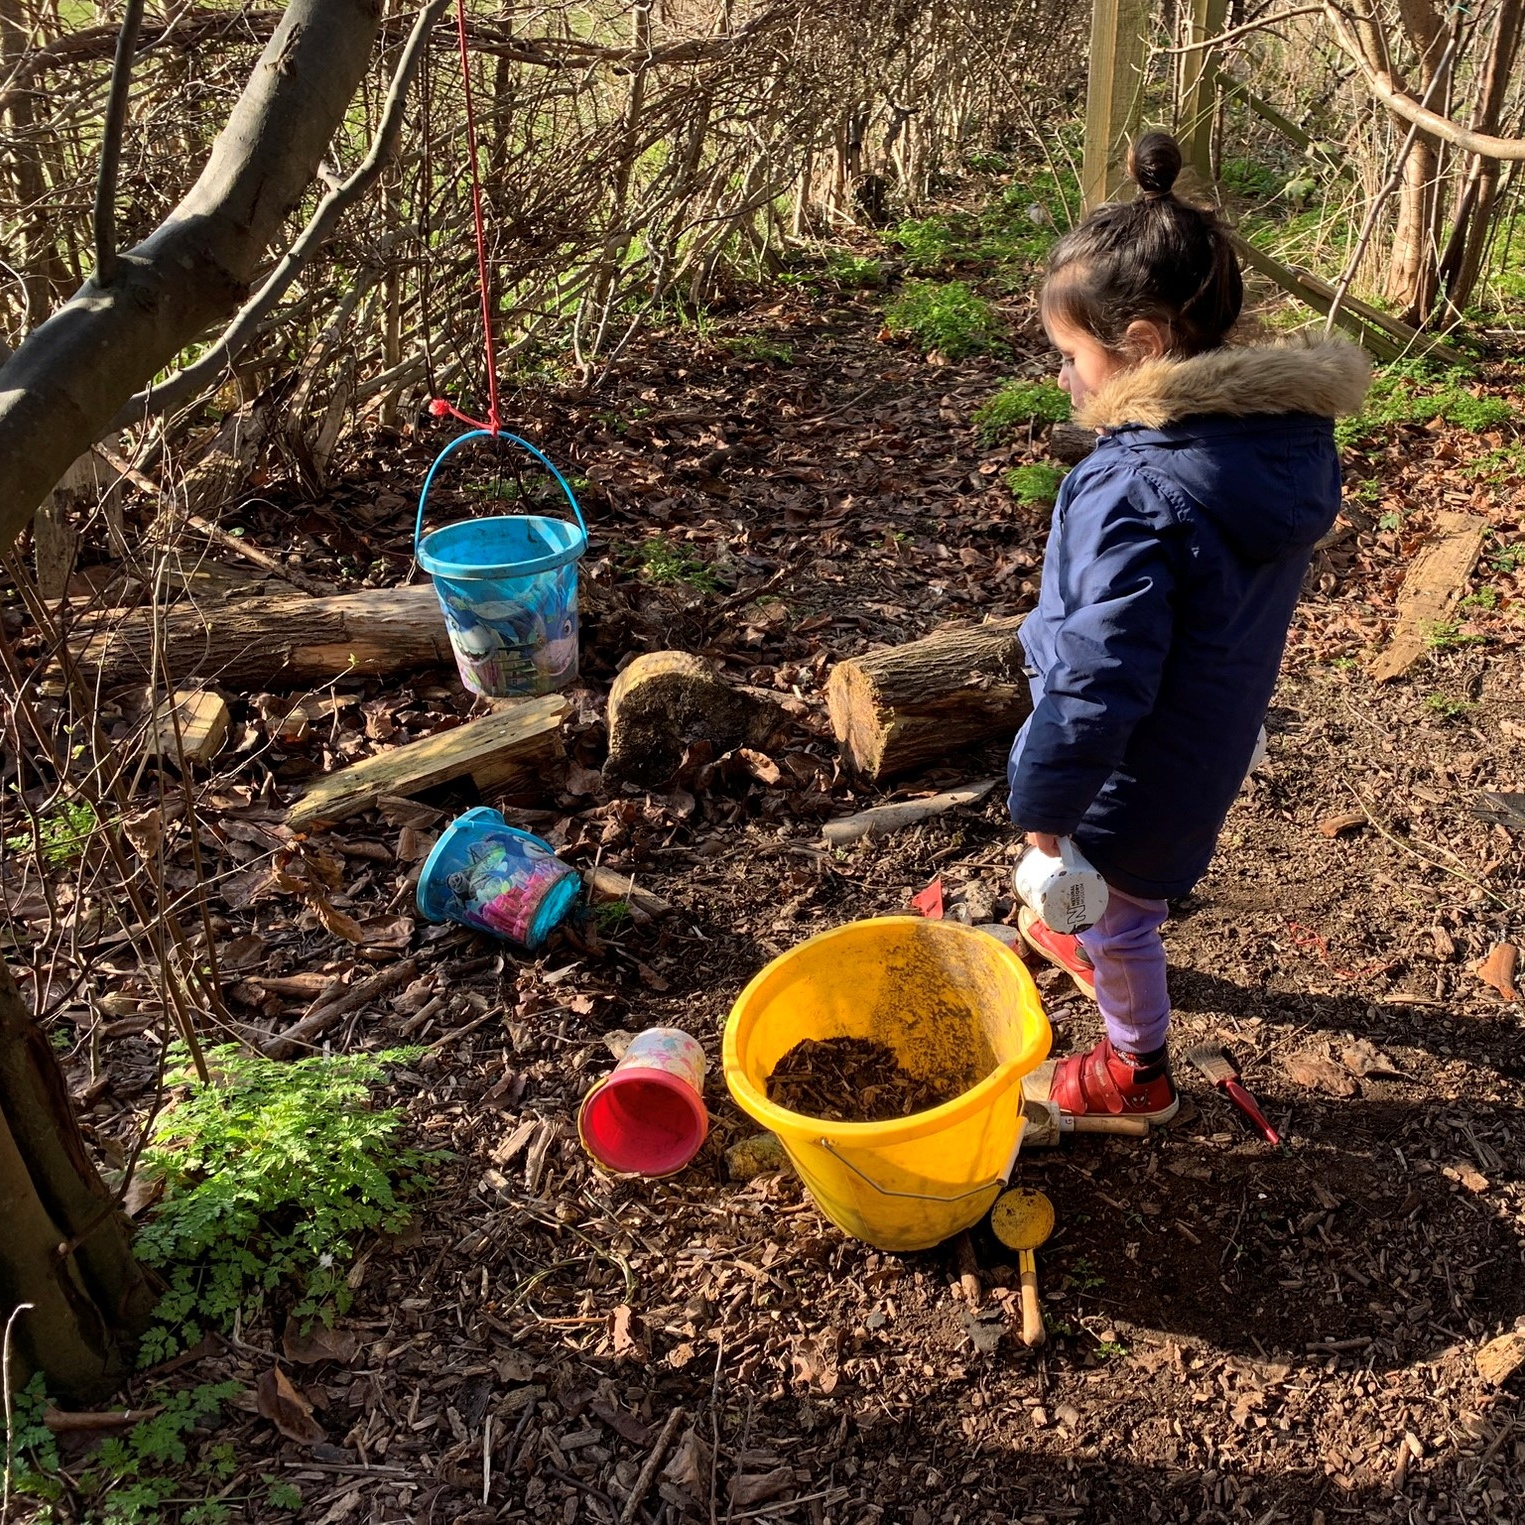 Fun in the mud kitchen under the quince tree near the laid hedge